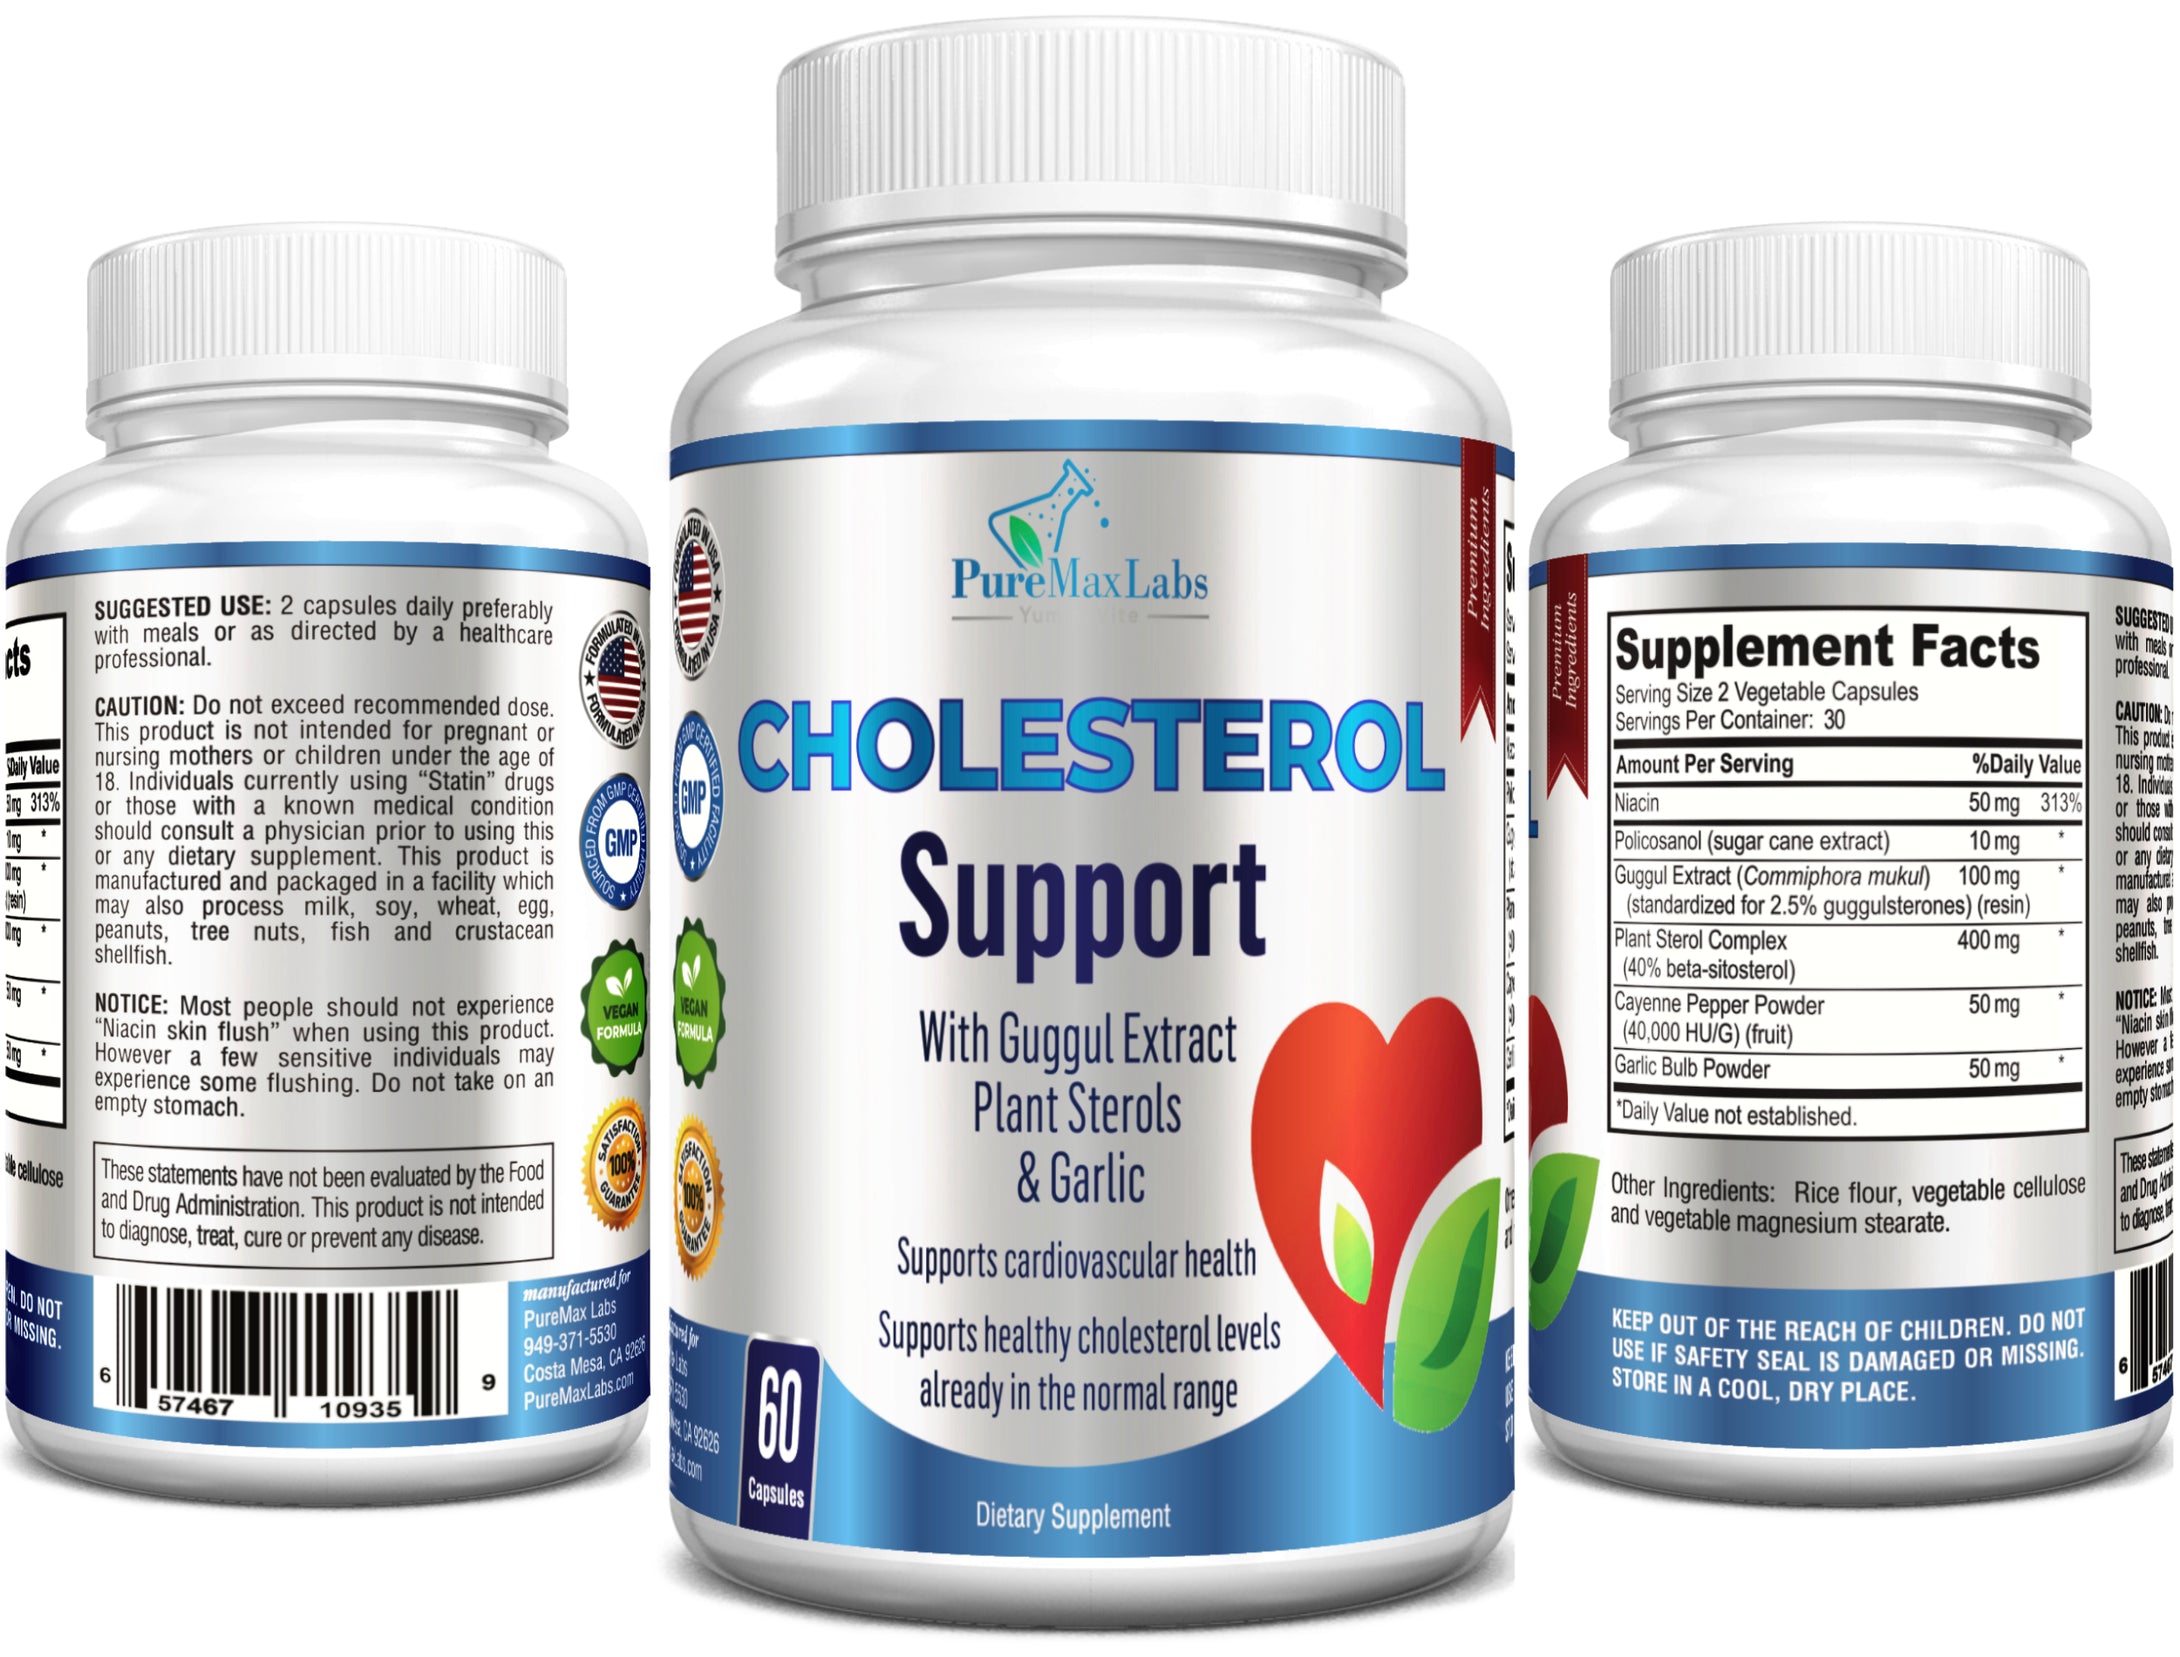 Cholesterol Support with Guggul Extract, Plant Sterols & Garlic- 60 Capsules